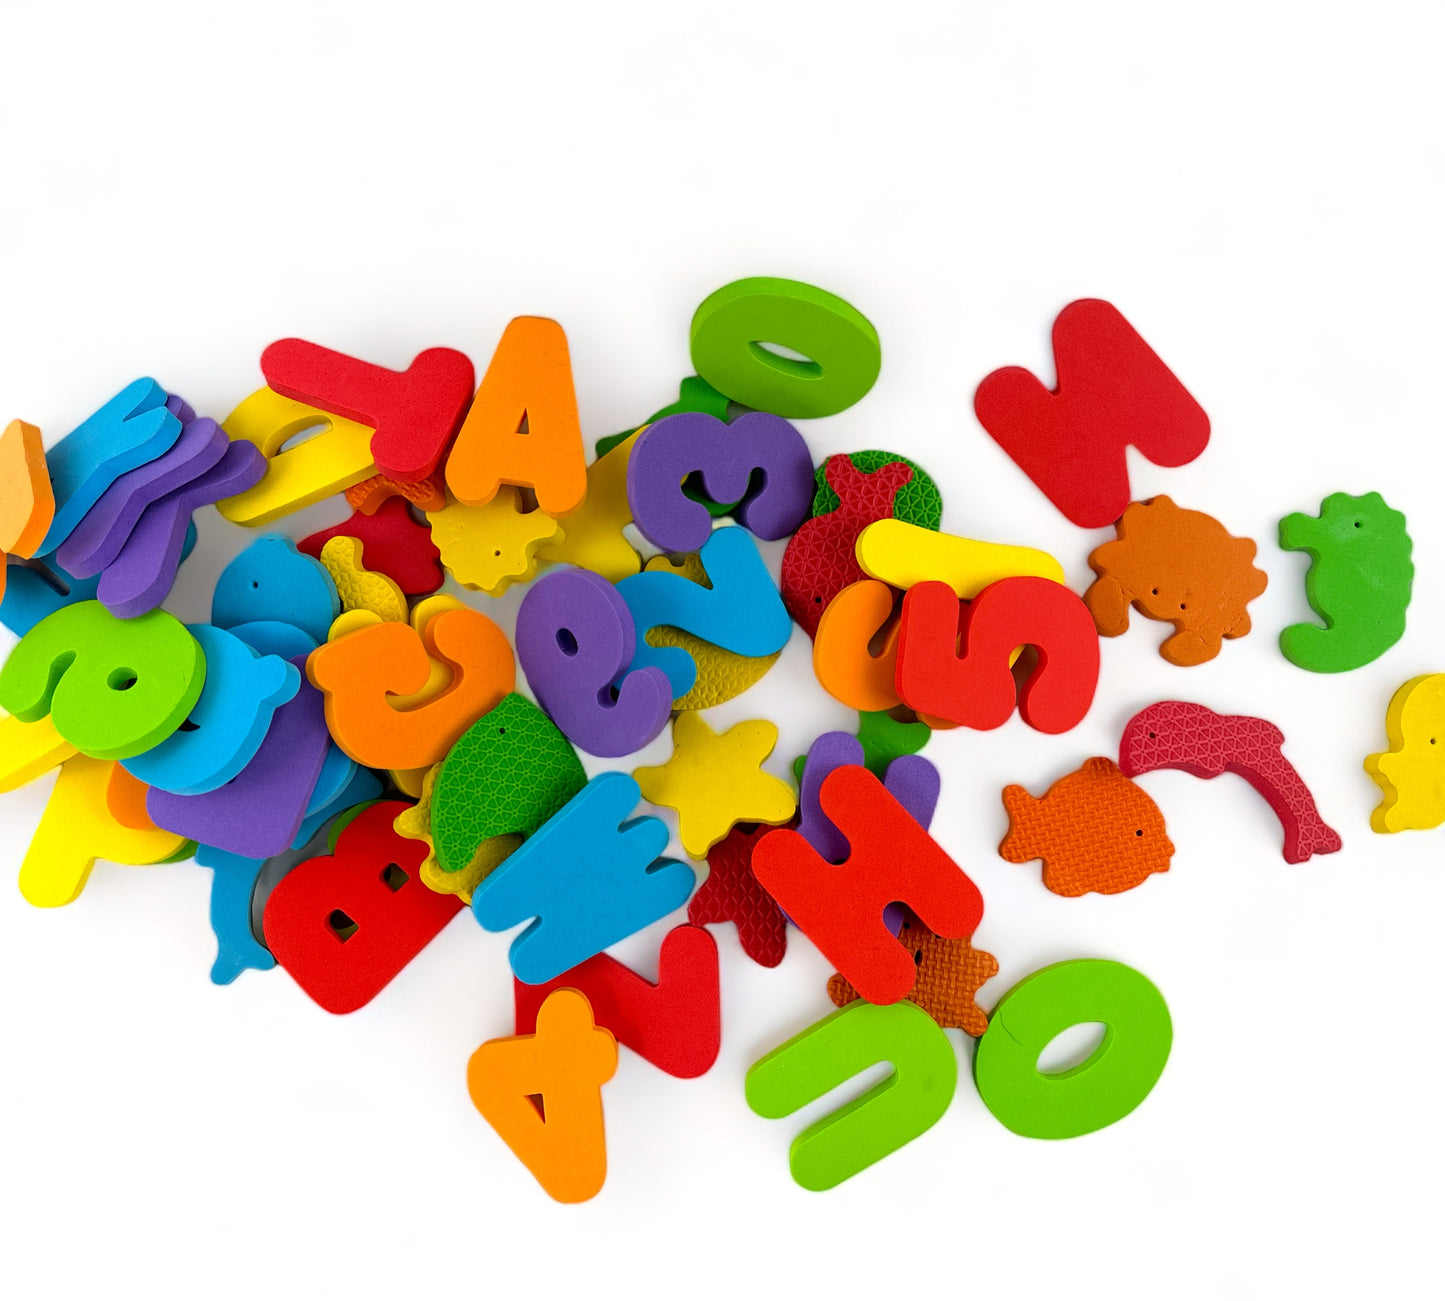 Variety Bag of Letters, Numbers ands Shapes for Bathtime